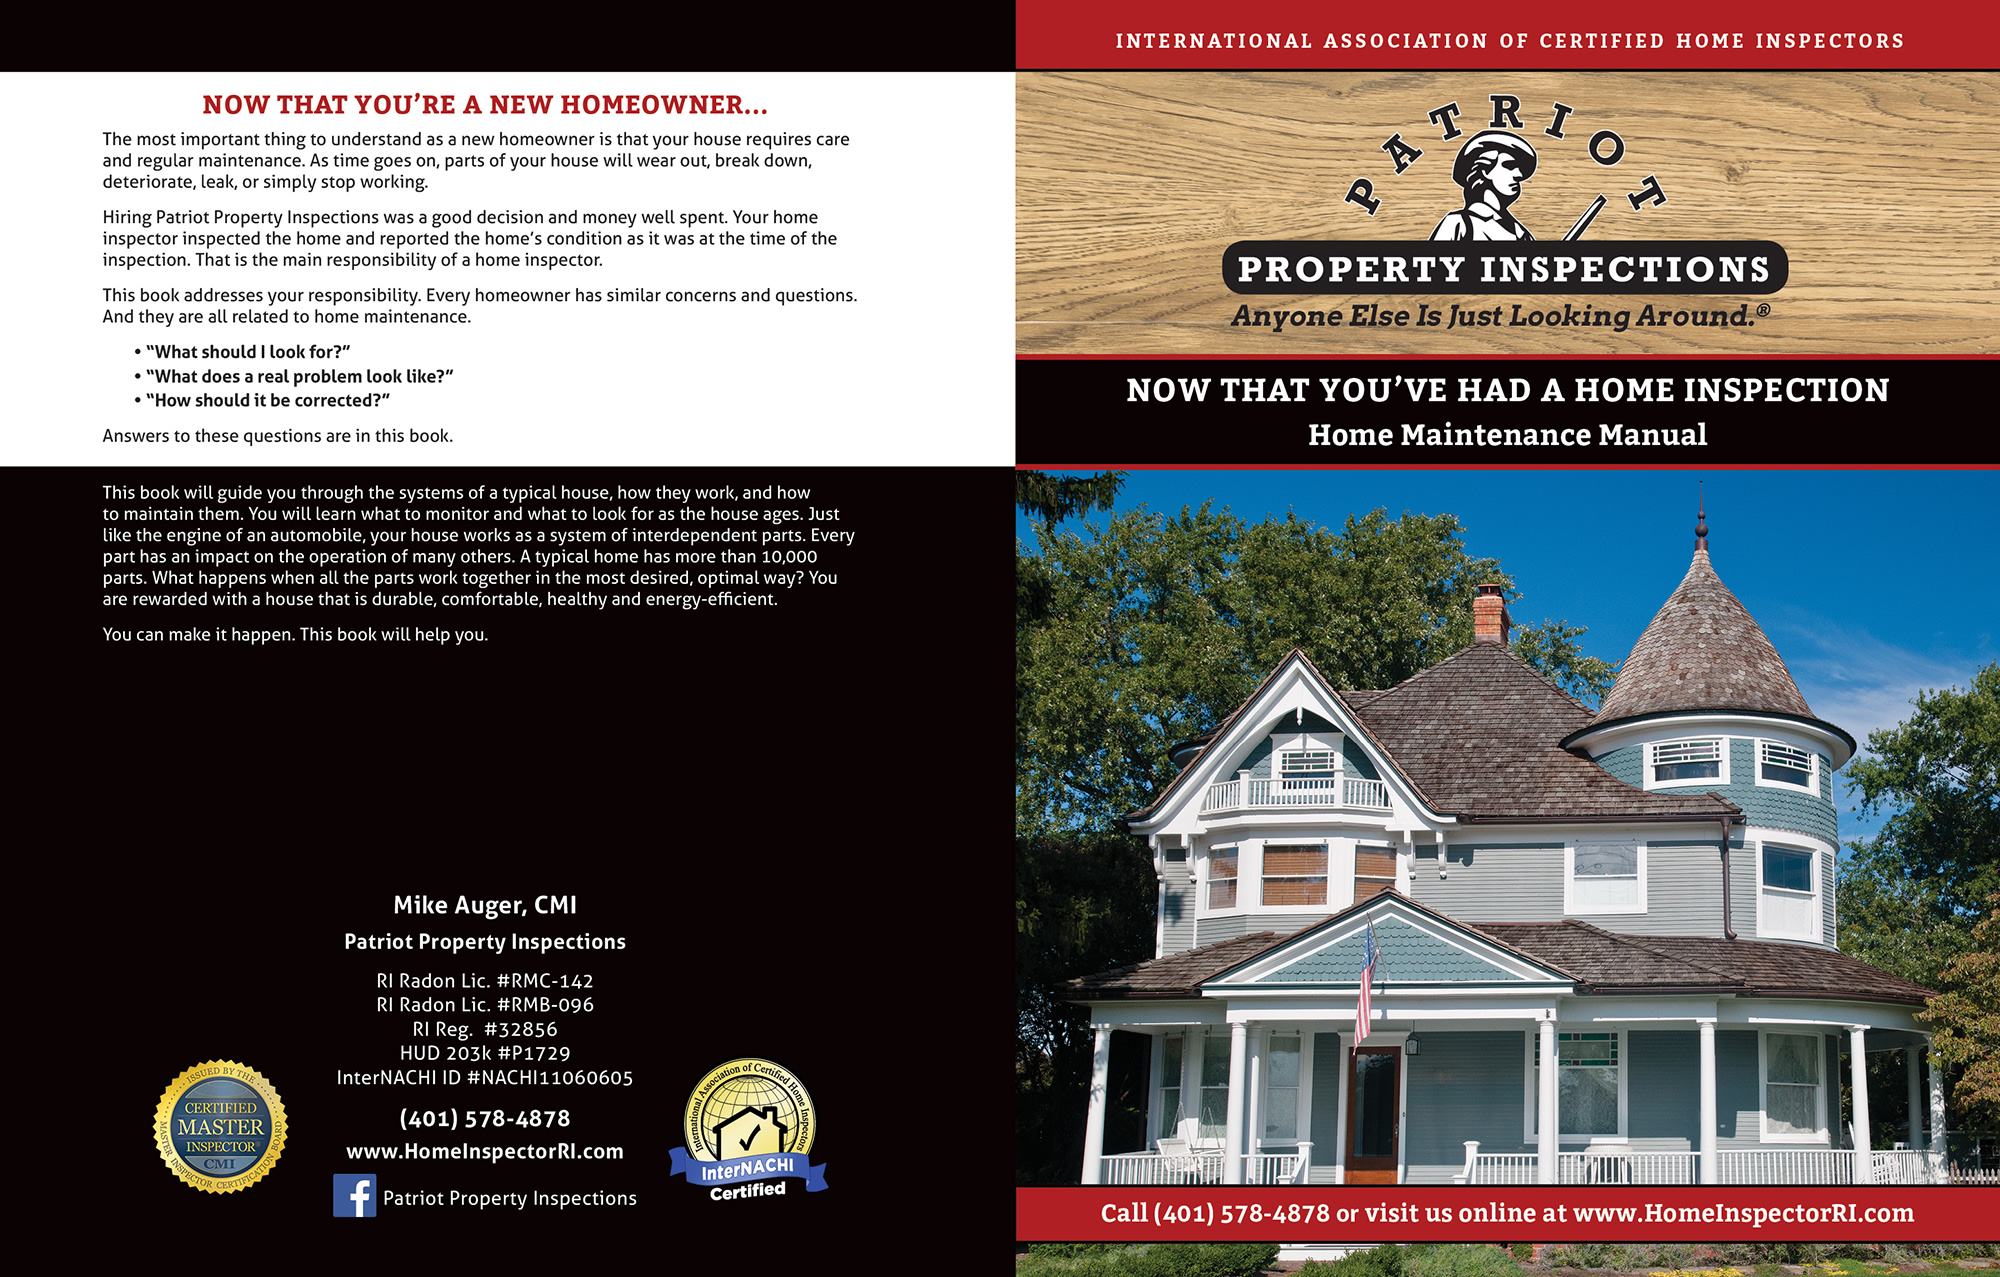 Custom Home Maintenance Book for Patriot Property Inspections.